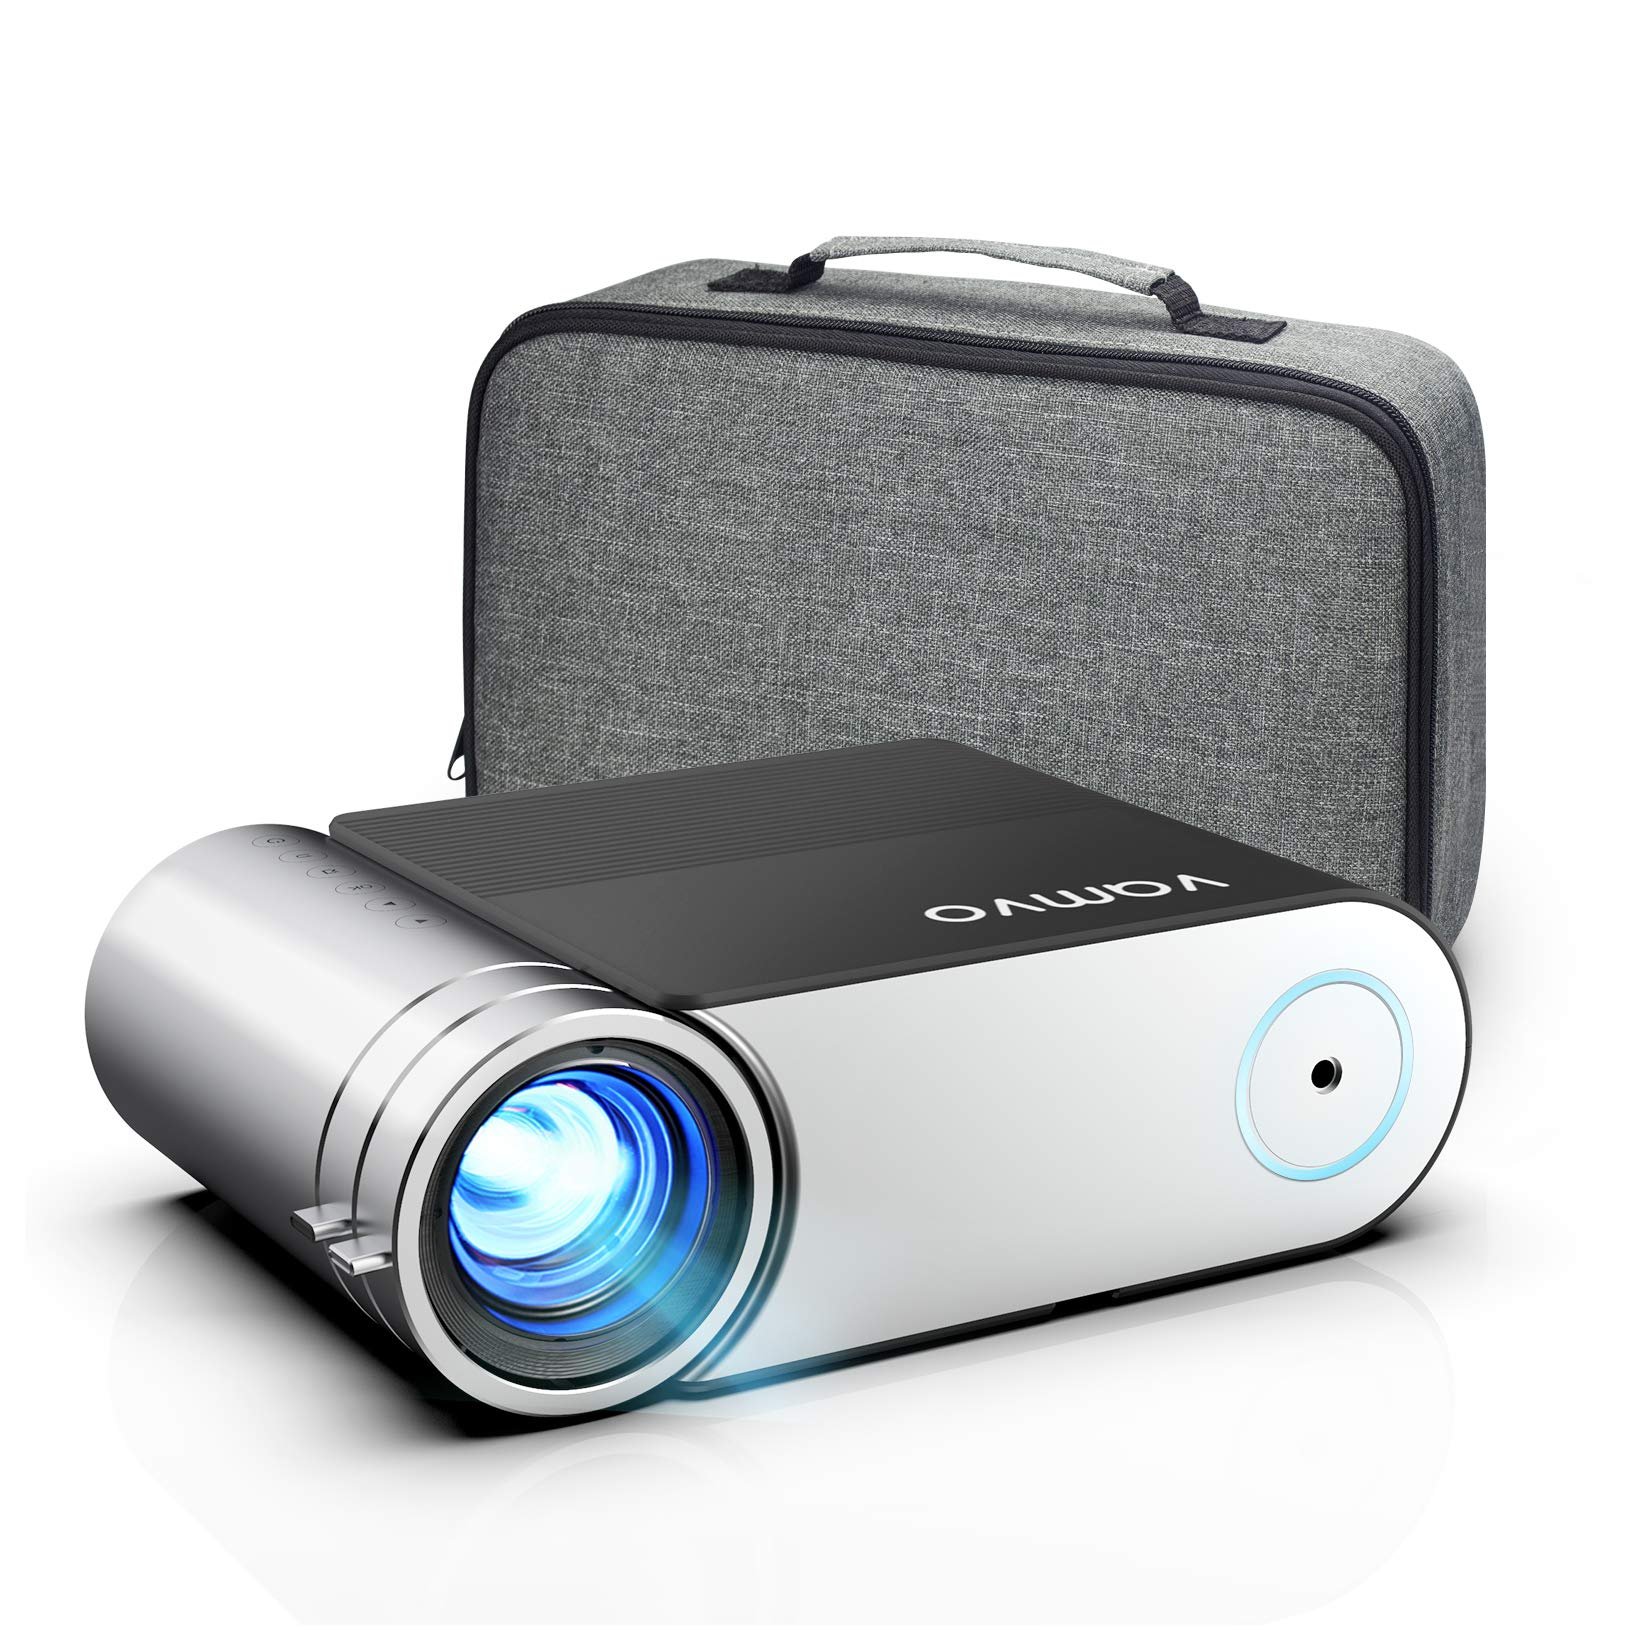 TOPTRO Portable Projector,5500 Lumens Video Projector Support 1080P,200  Display,HiFi Speaker,[Native 720P] 55000 Hrs Outdoor/Home Projector  Compatible with TV Stick/Phone/Laptop/PS4/SD/USB/VGA/HDMI 